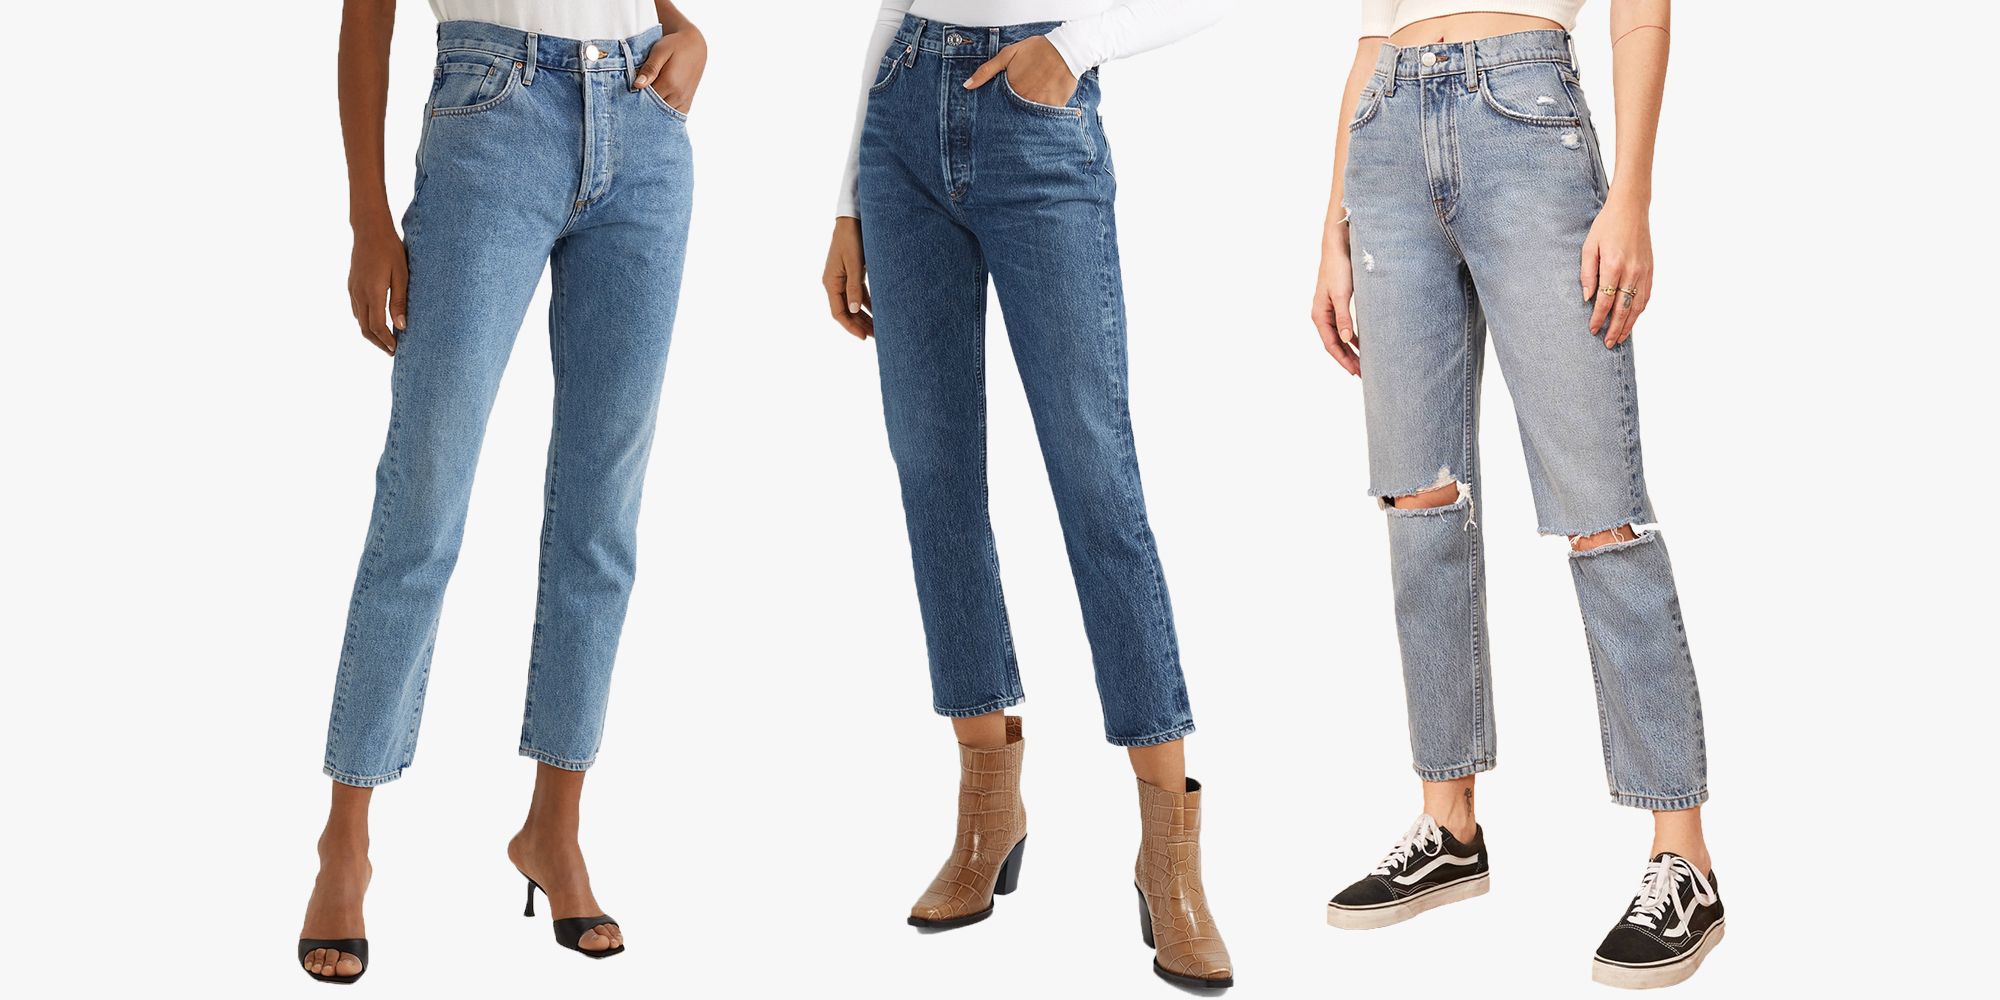 Are jeans business casual?